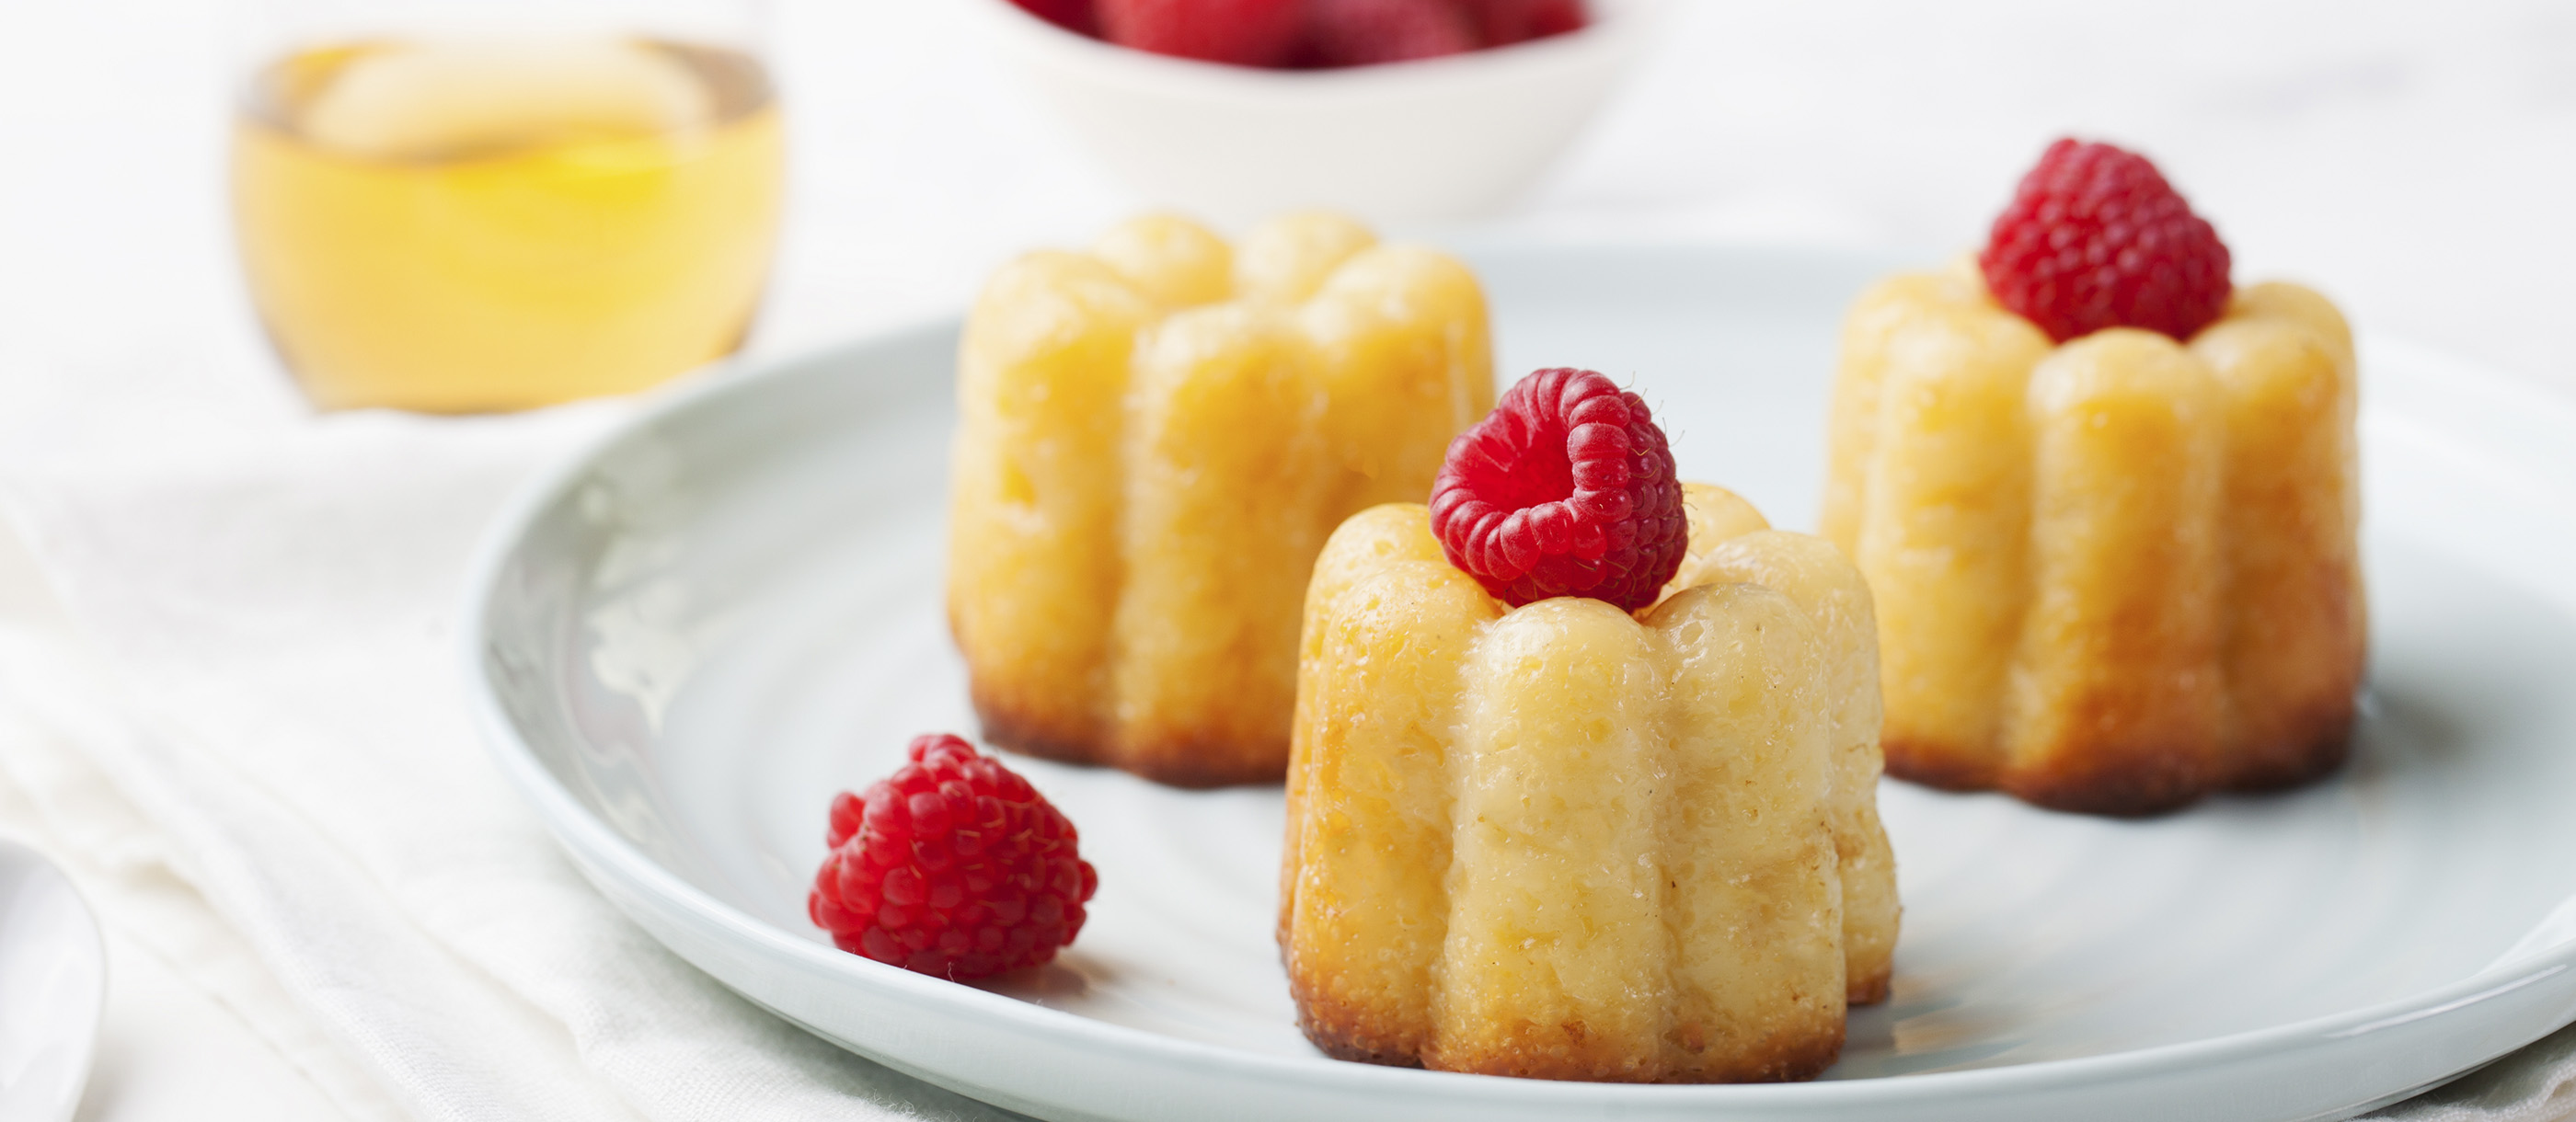 Easy French Baba au Rhum cake recipe - Snippets of Paris